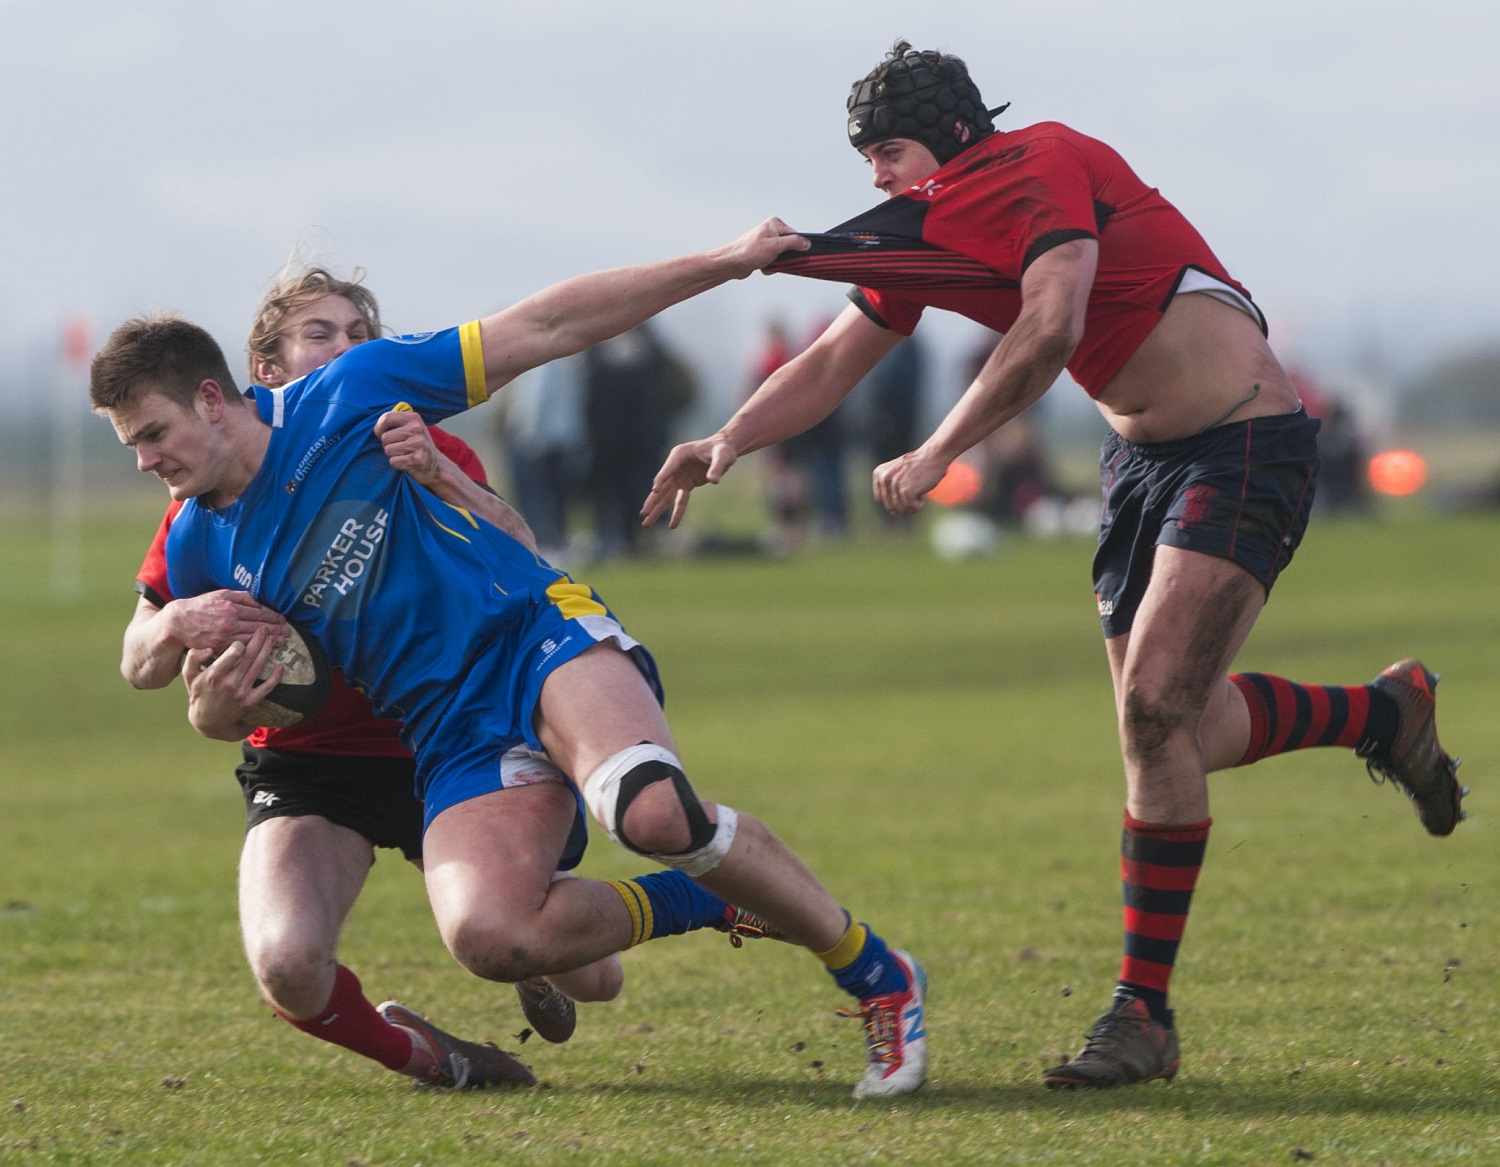 Elite Sport Rugby Action Shot - 3 players